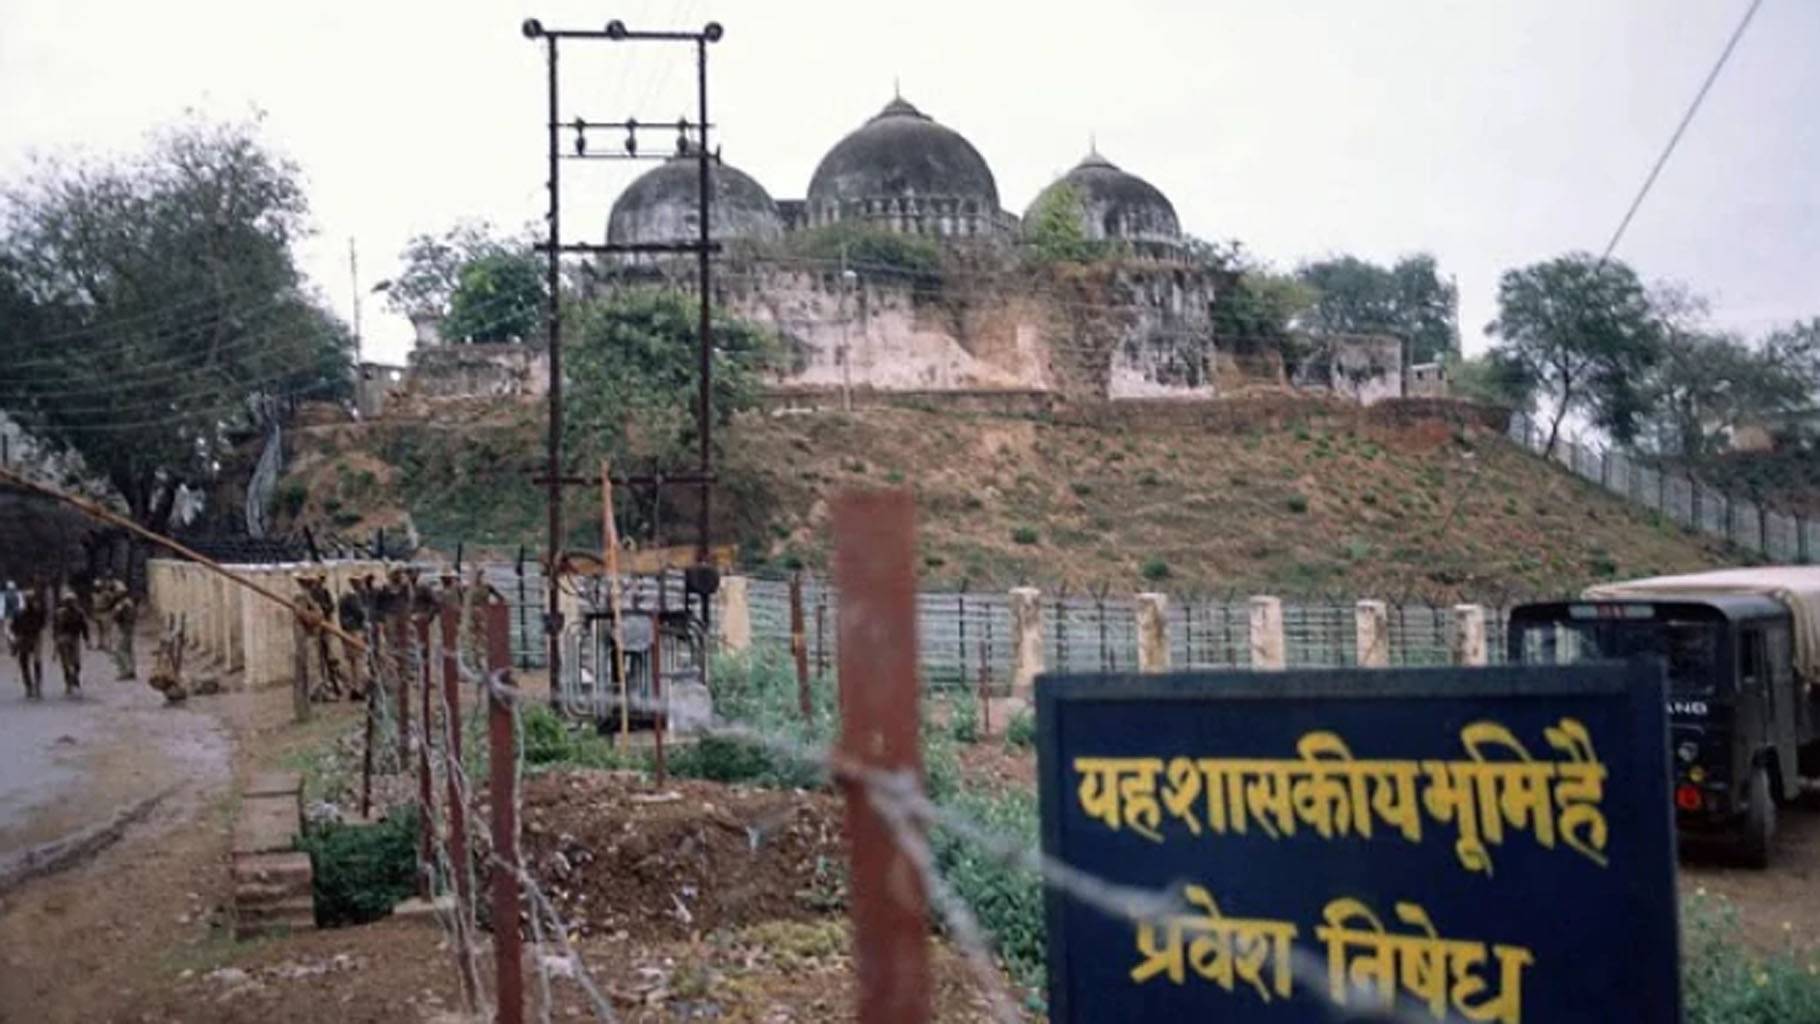 Ayodhya: Ram Lalla idol shifted to temporary structure to allow temple construction